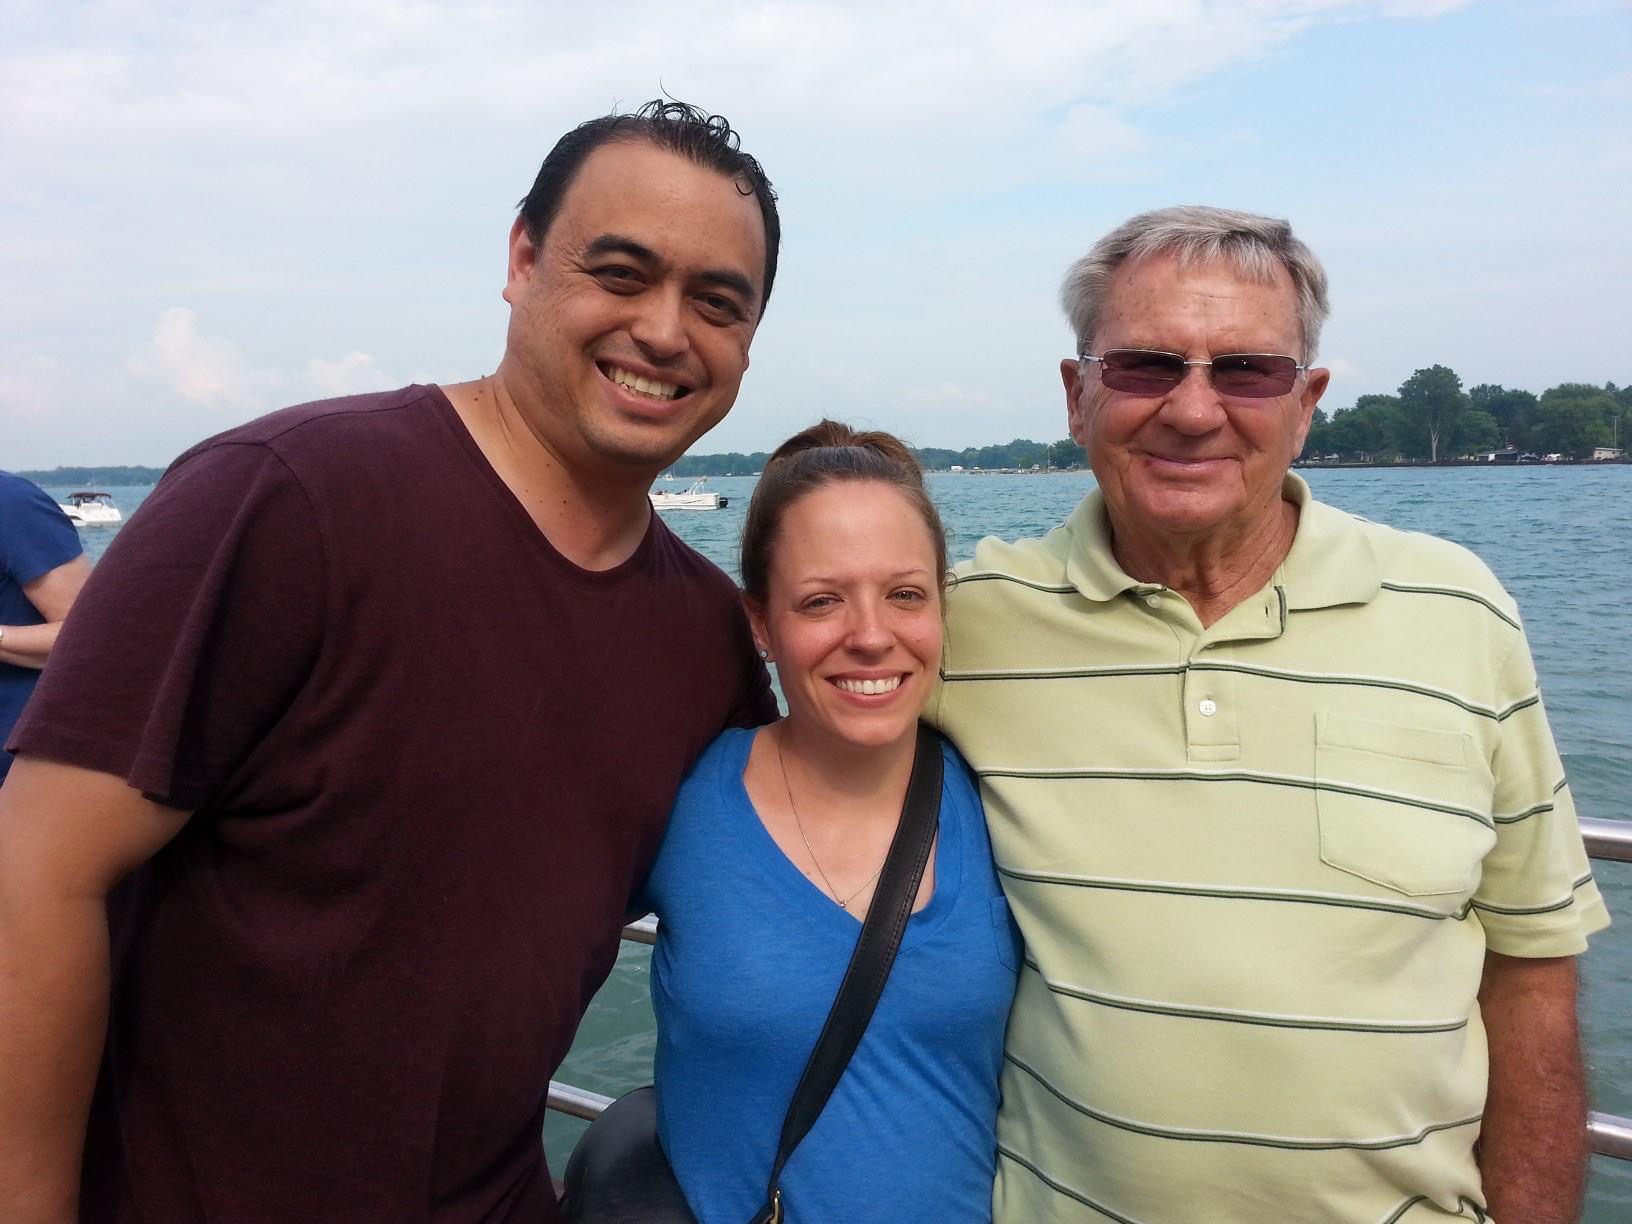 Joe, Emmy and Grandpa at the cottage- wonderful times, wonderful memories! I love you Grandpa! I think of you everyday- you were an amazing and wonderful role model in my life. Rest In Peace…enjoy endless golf games up there! <br />
-Em and Joe